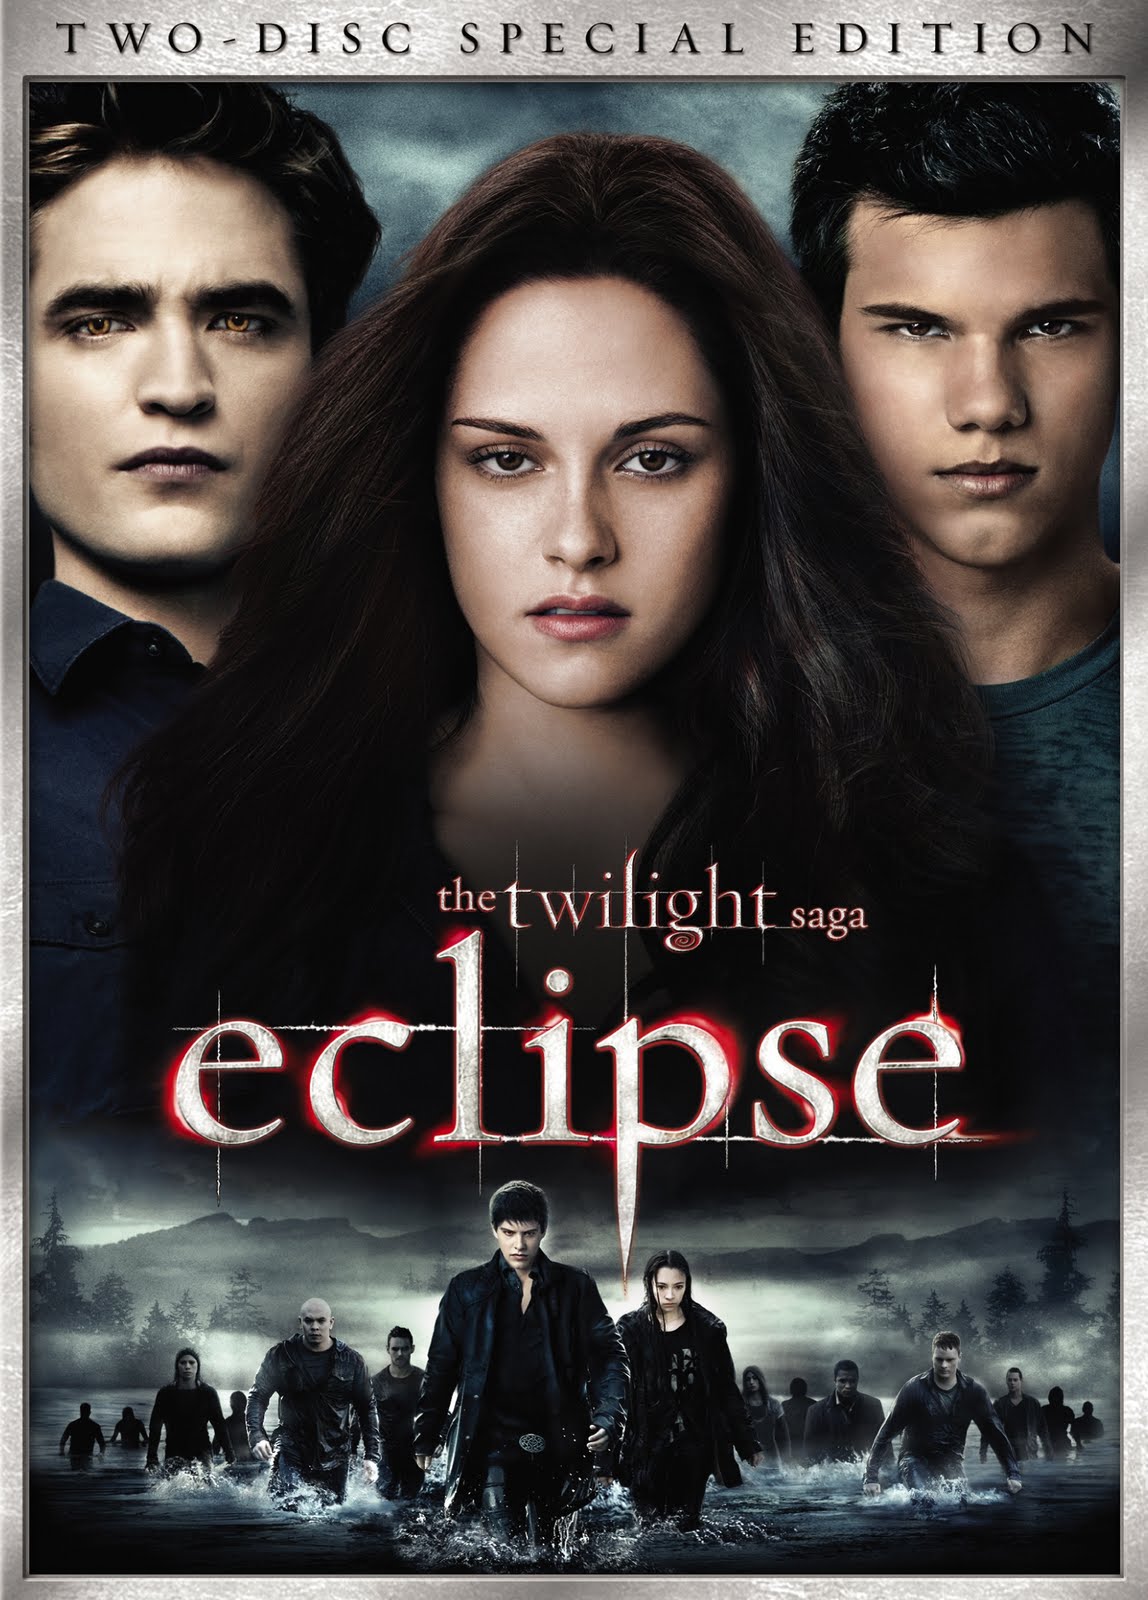 DVD/Blu-ray Cover - Twilight:Eclipse Two Disc Special Edition DVD - Beautiful Jodelle ...